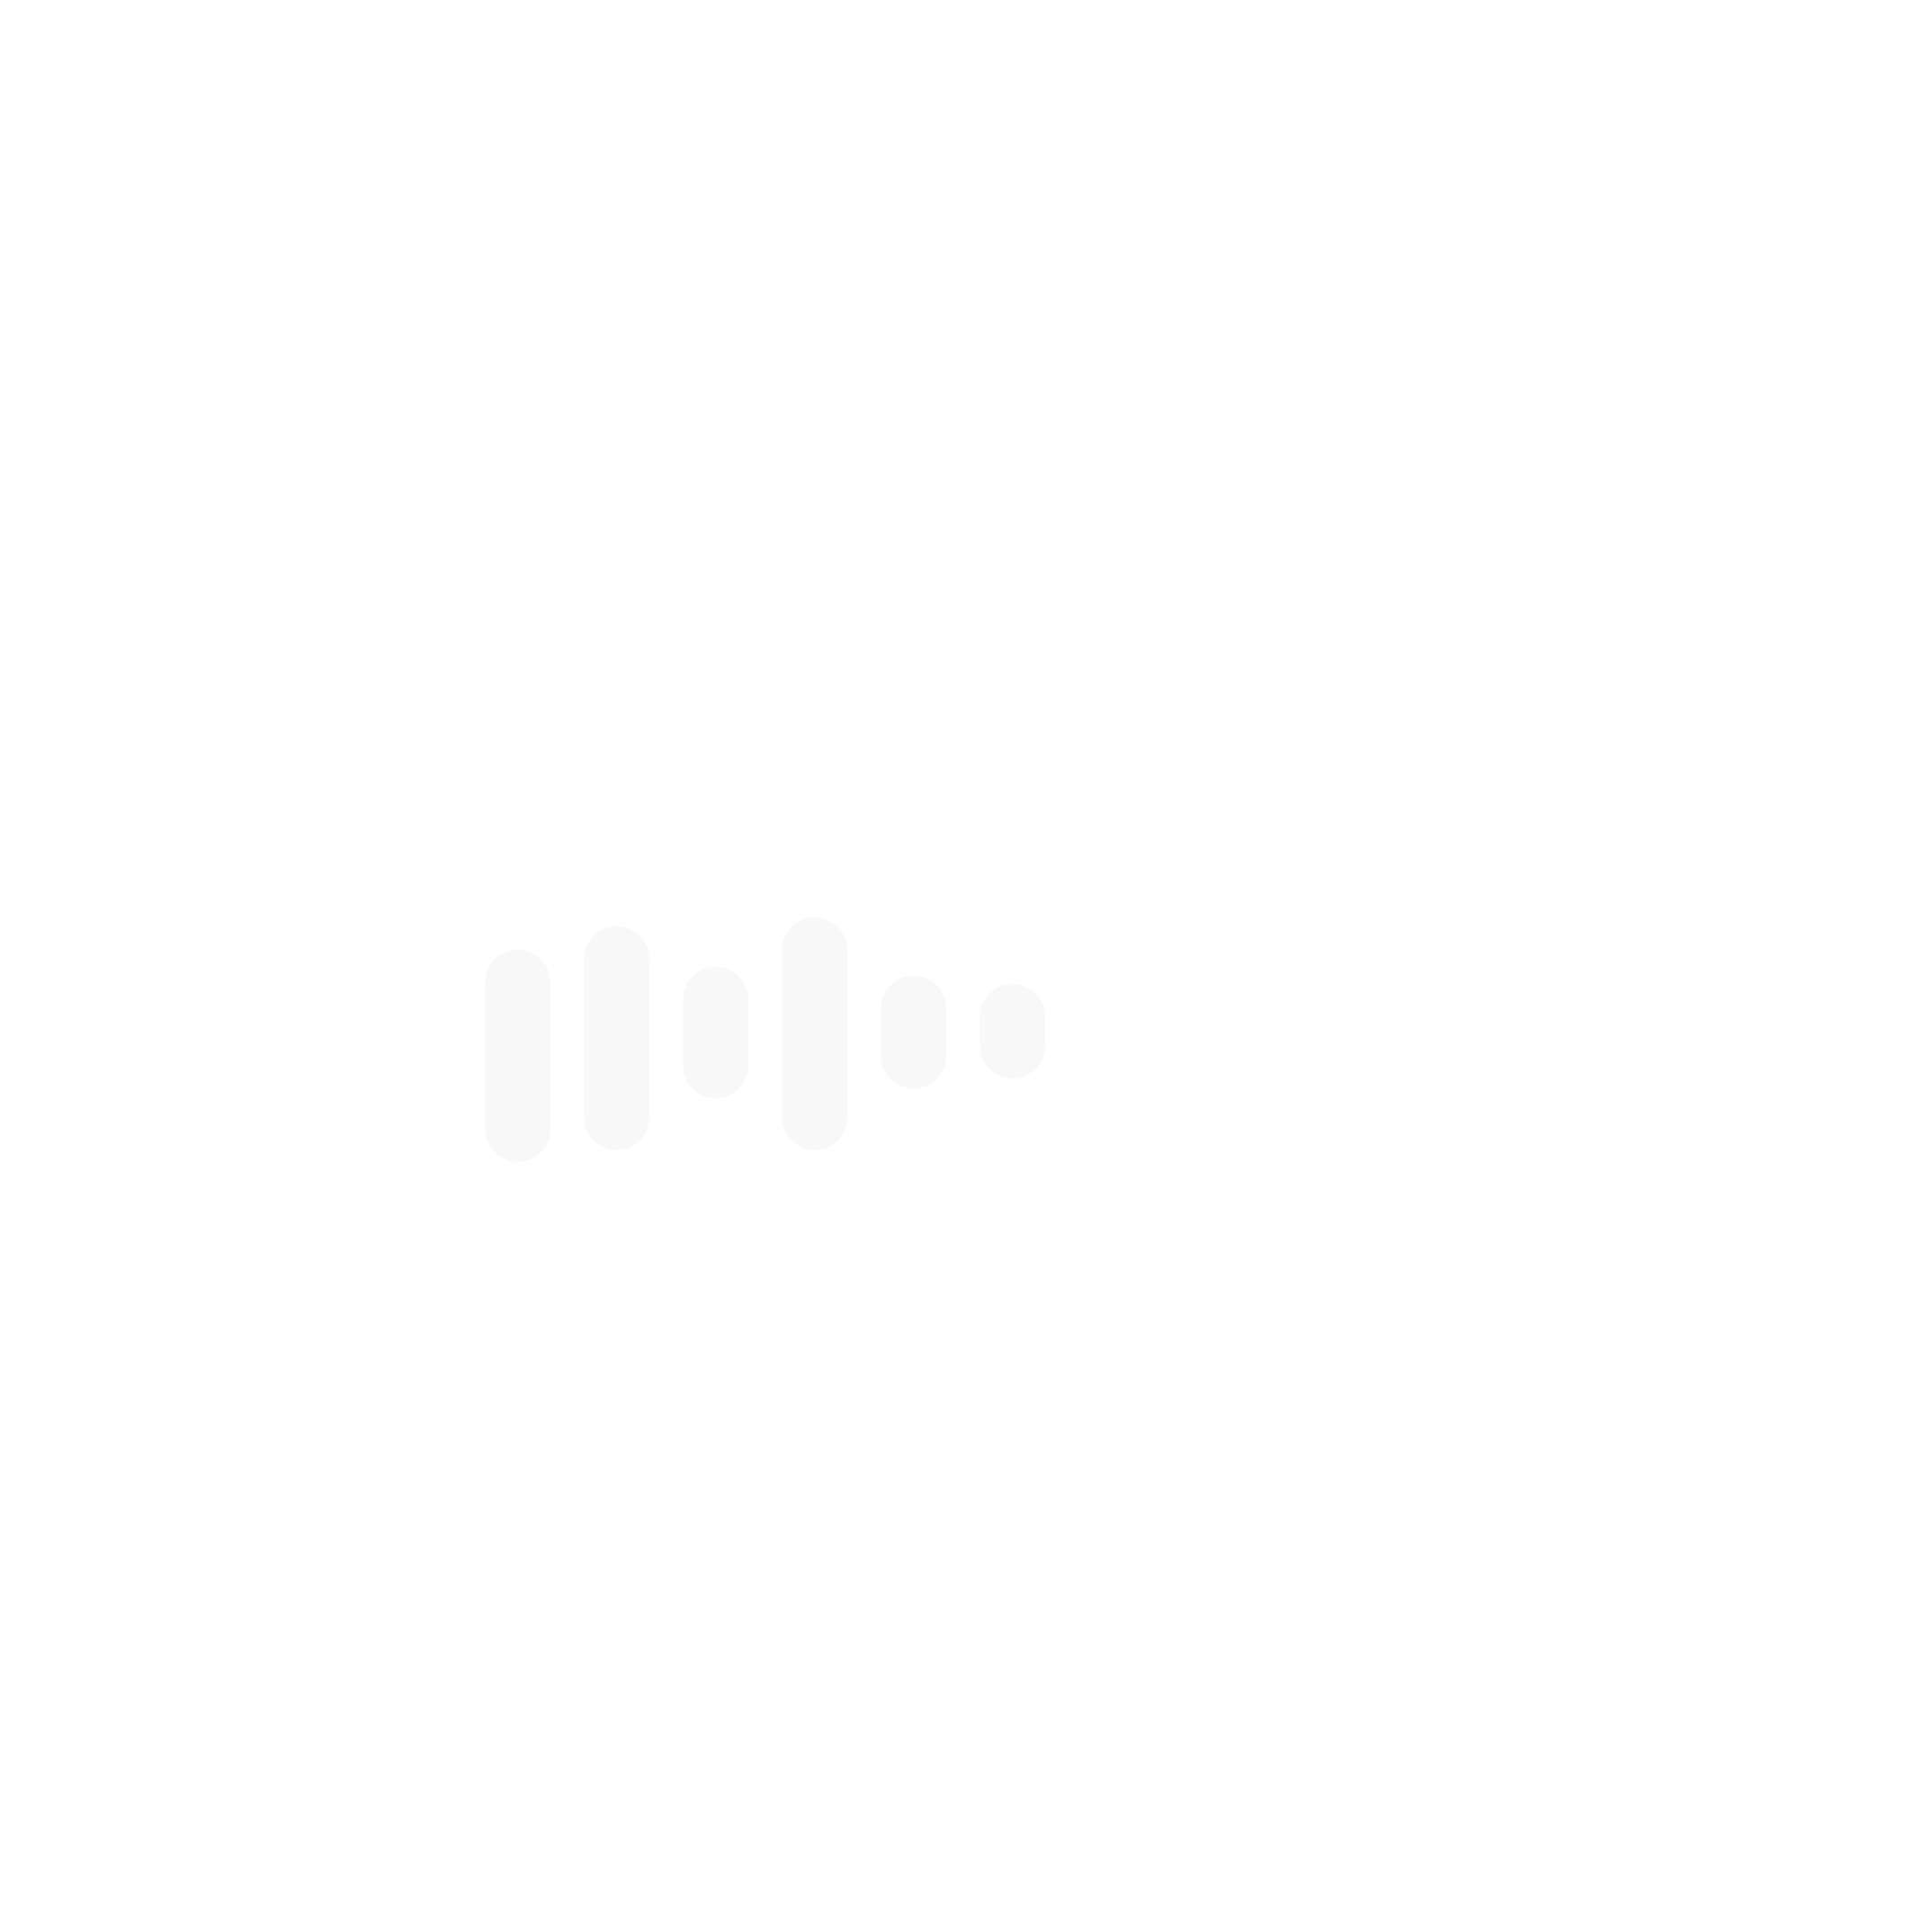 Mixed by Naptime